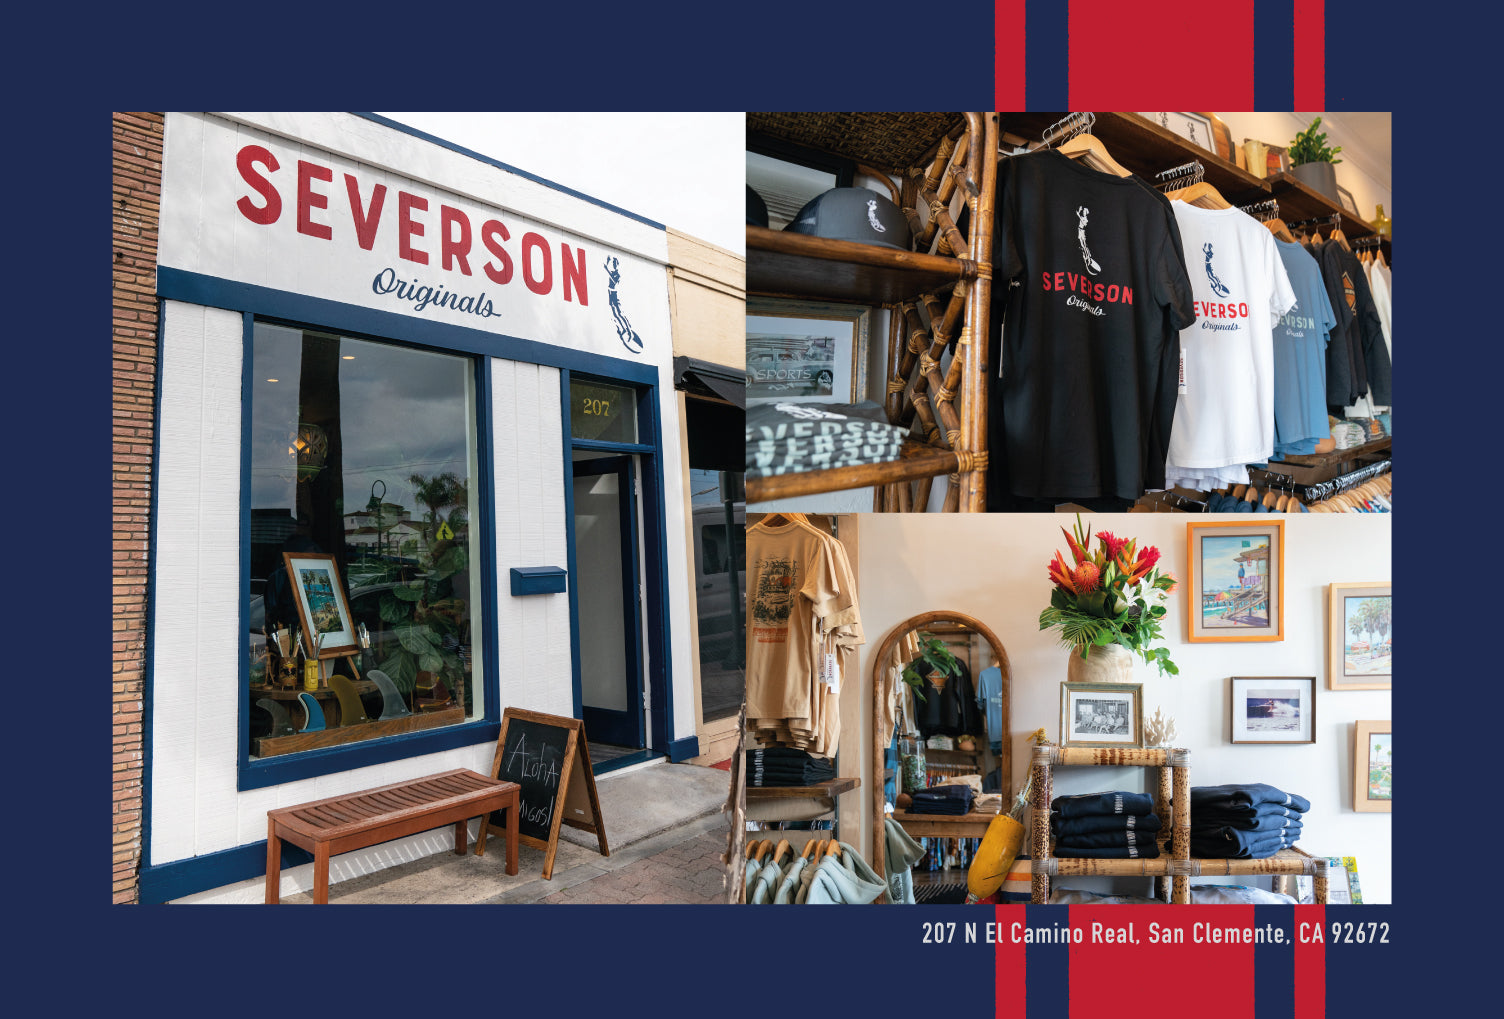 Banner image of Severson Originals store front in San Clemente, California. Come by and say hi!